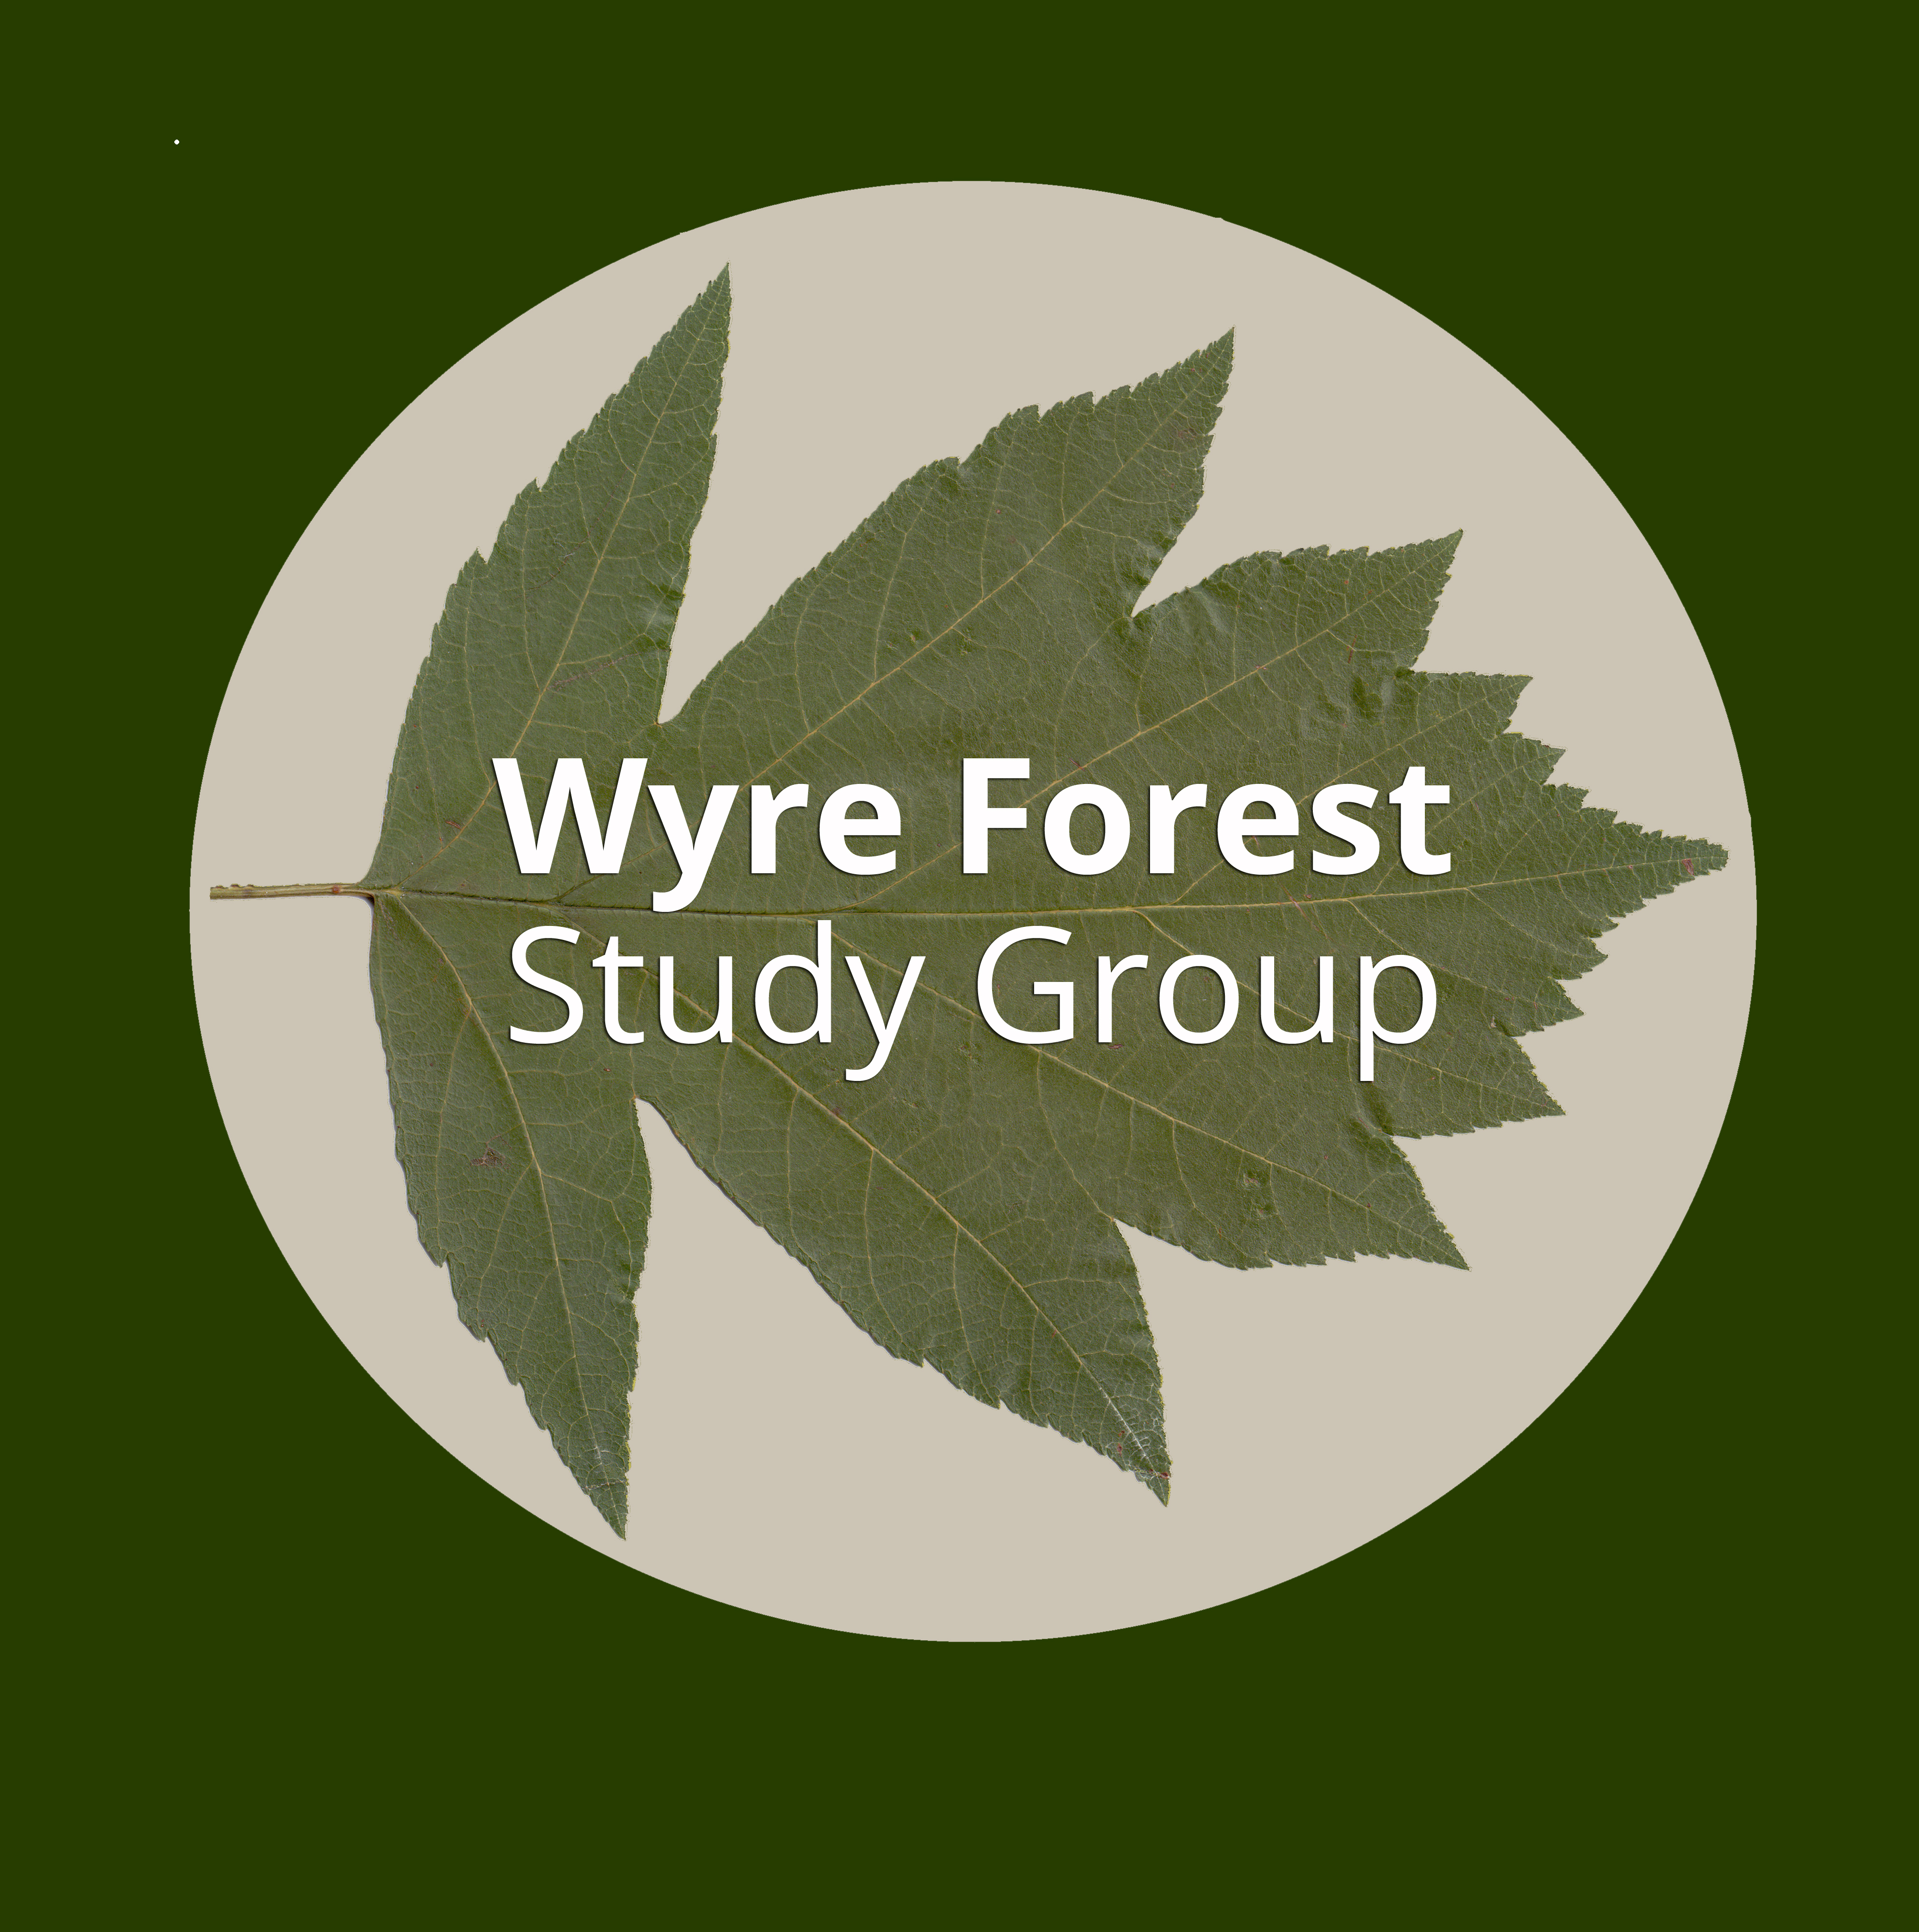 Wyre Forest Study Group